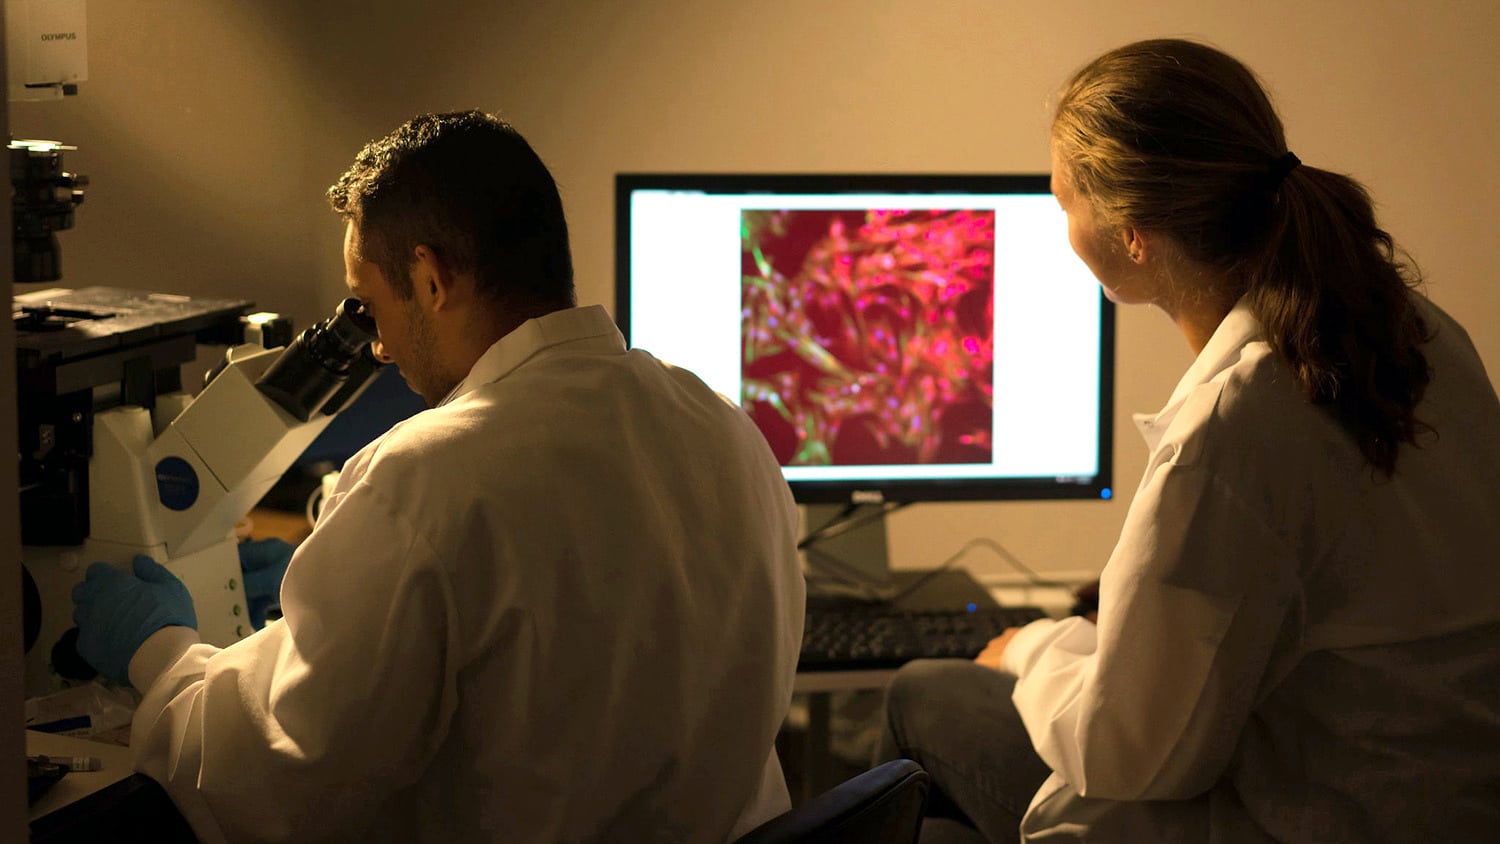 Two researchers look at samples under a microscope and on a screen in a darkened lab